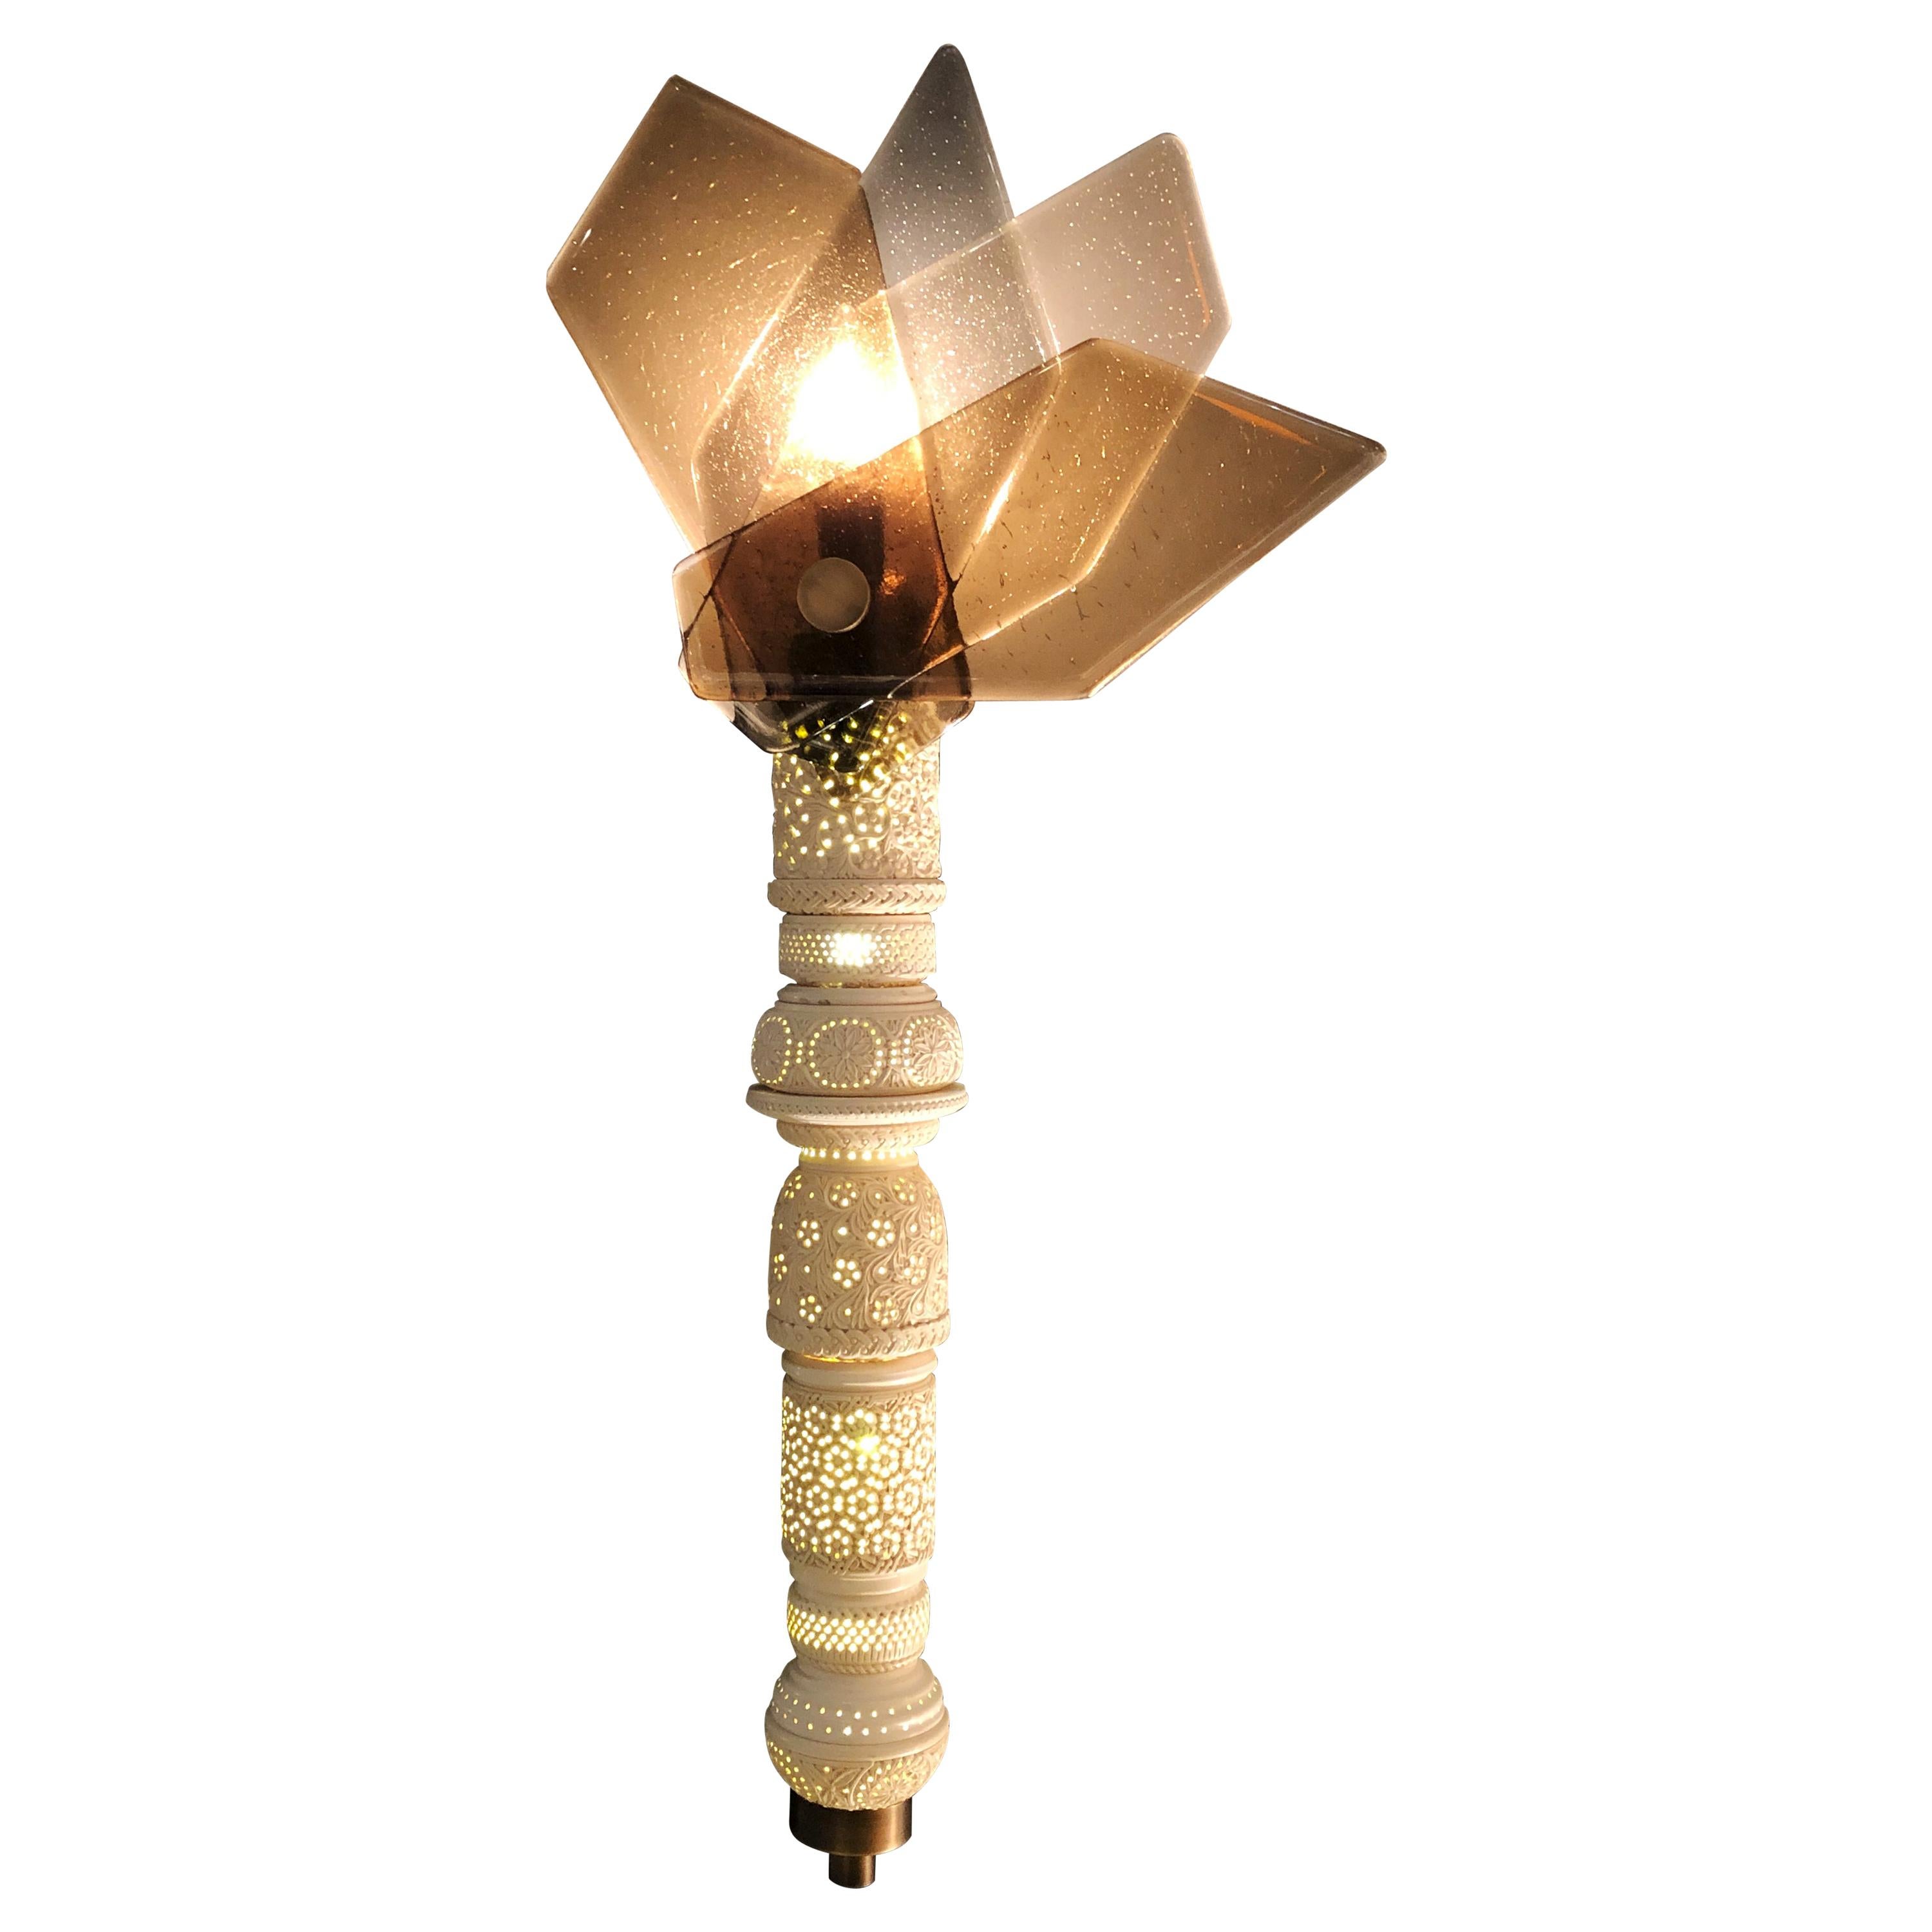 Lace Fan Wall Sconce in Meerschaum with Glass Shade by Feyza Kemahlioglu For Sale